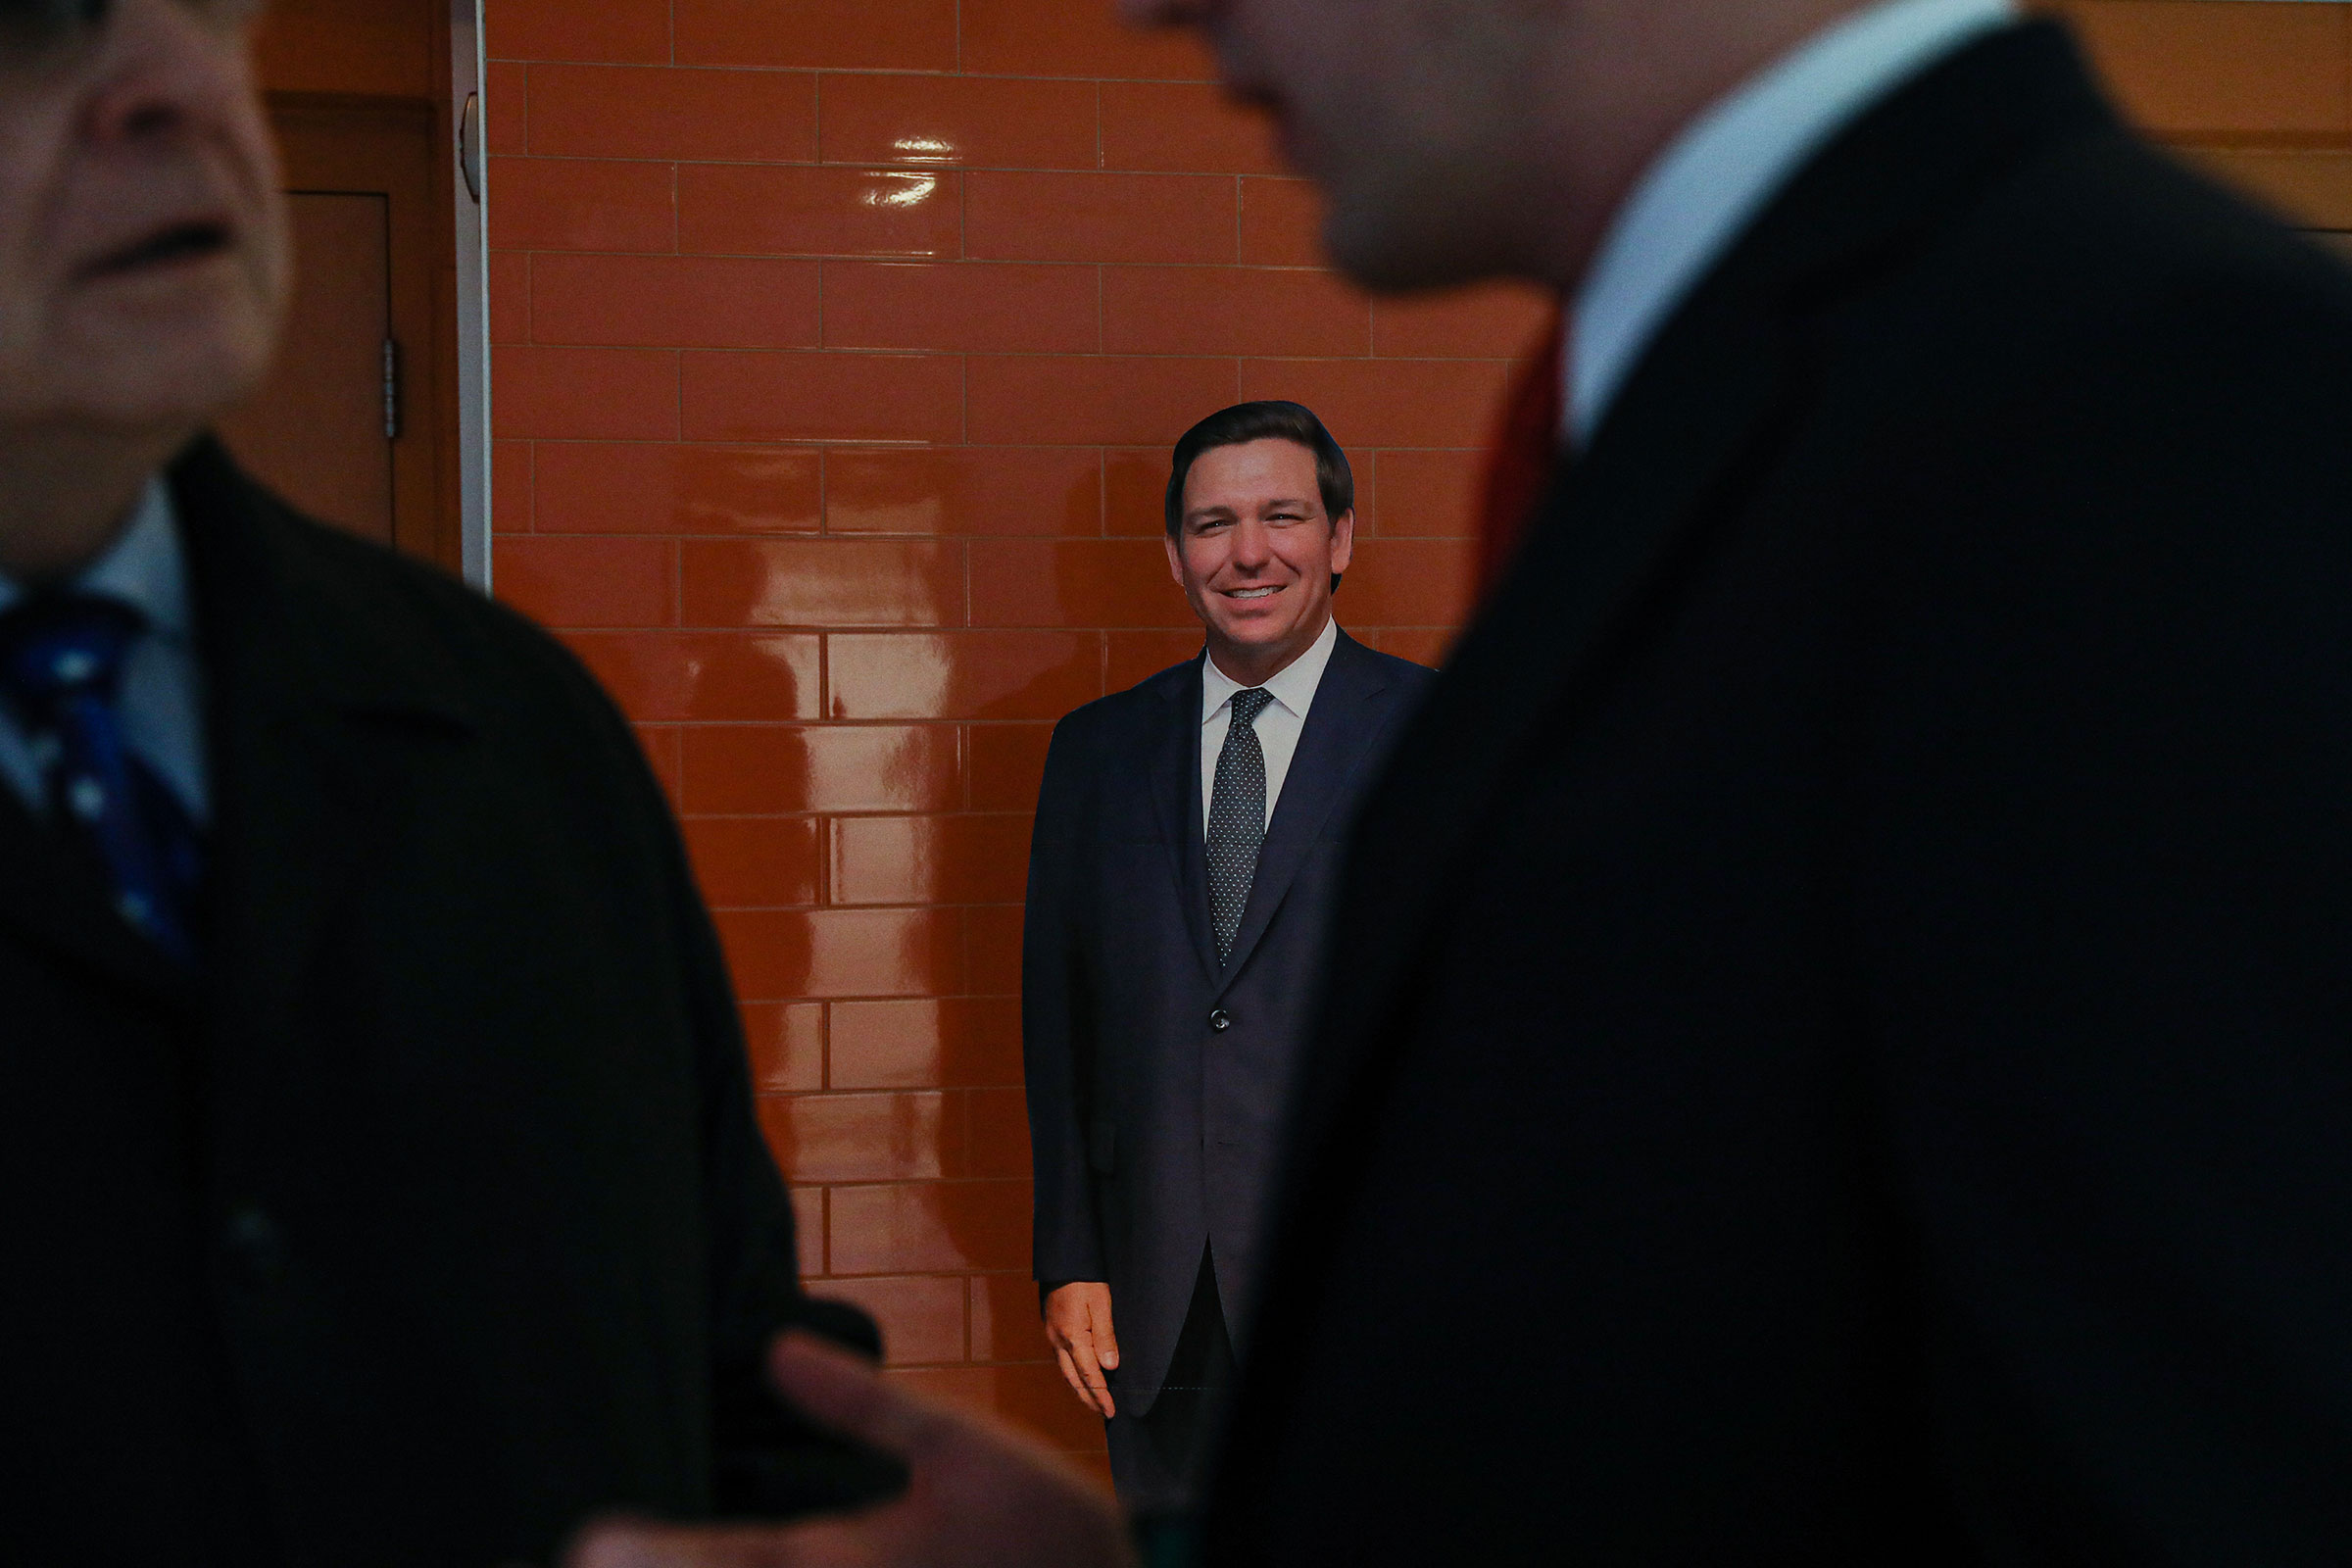 A cardboard cutout of DeSantis stands against a wall at the New Hampshire Republican State Committee fundraiser on Jan. 28